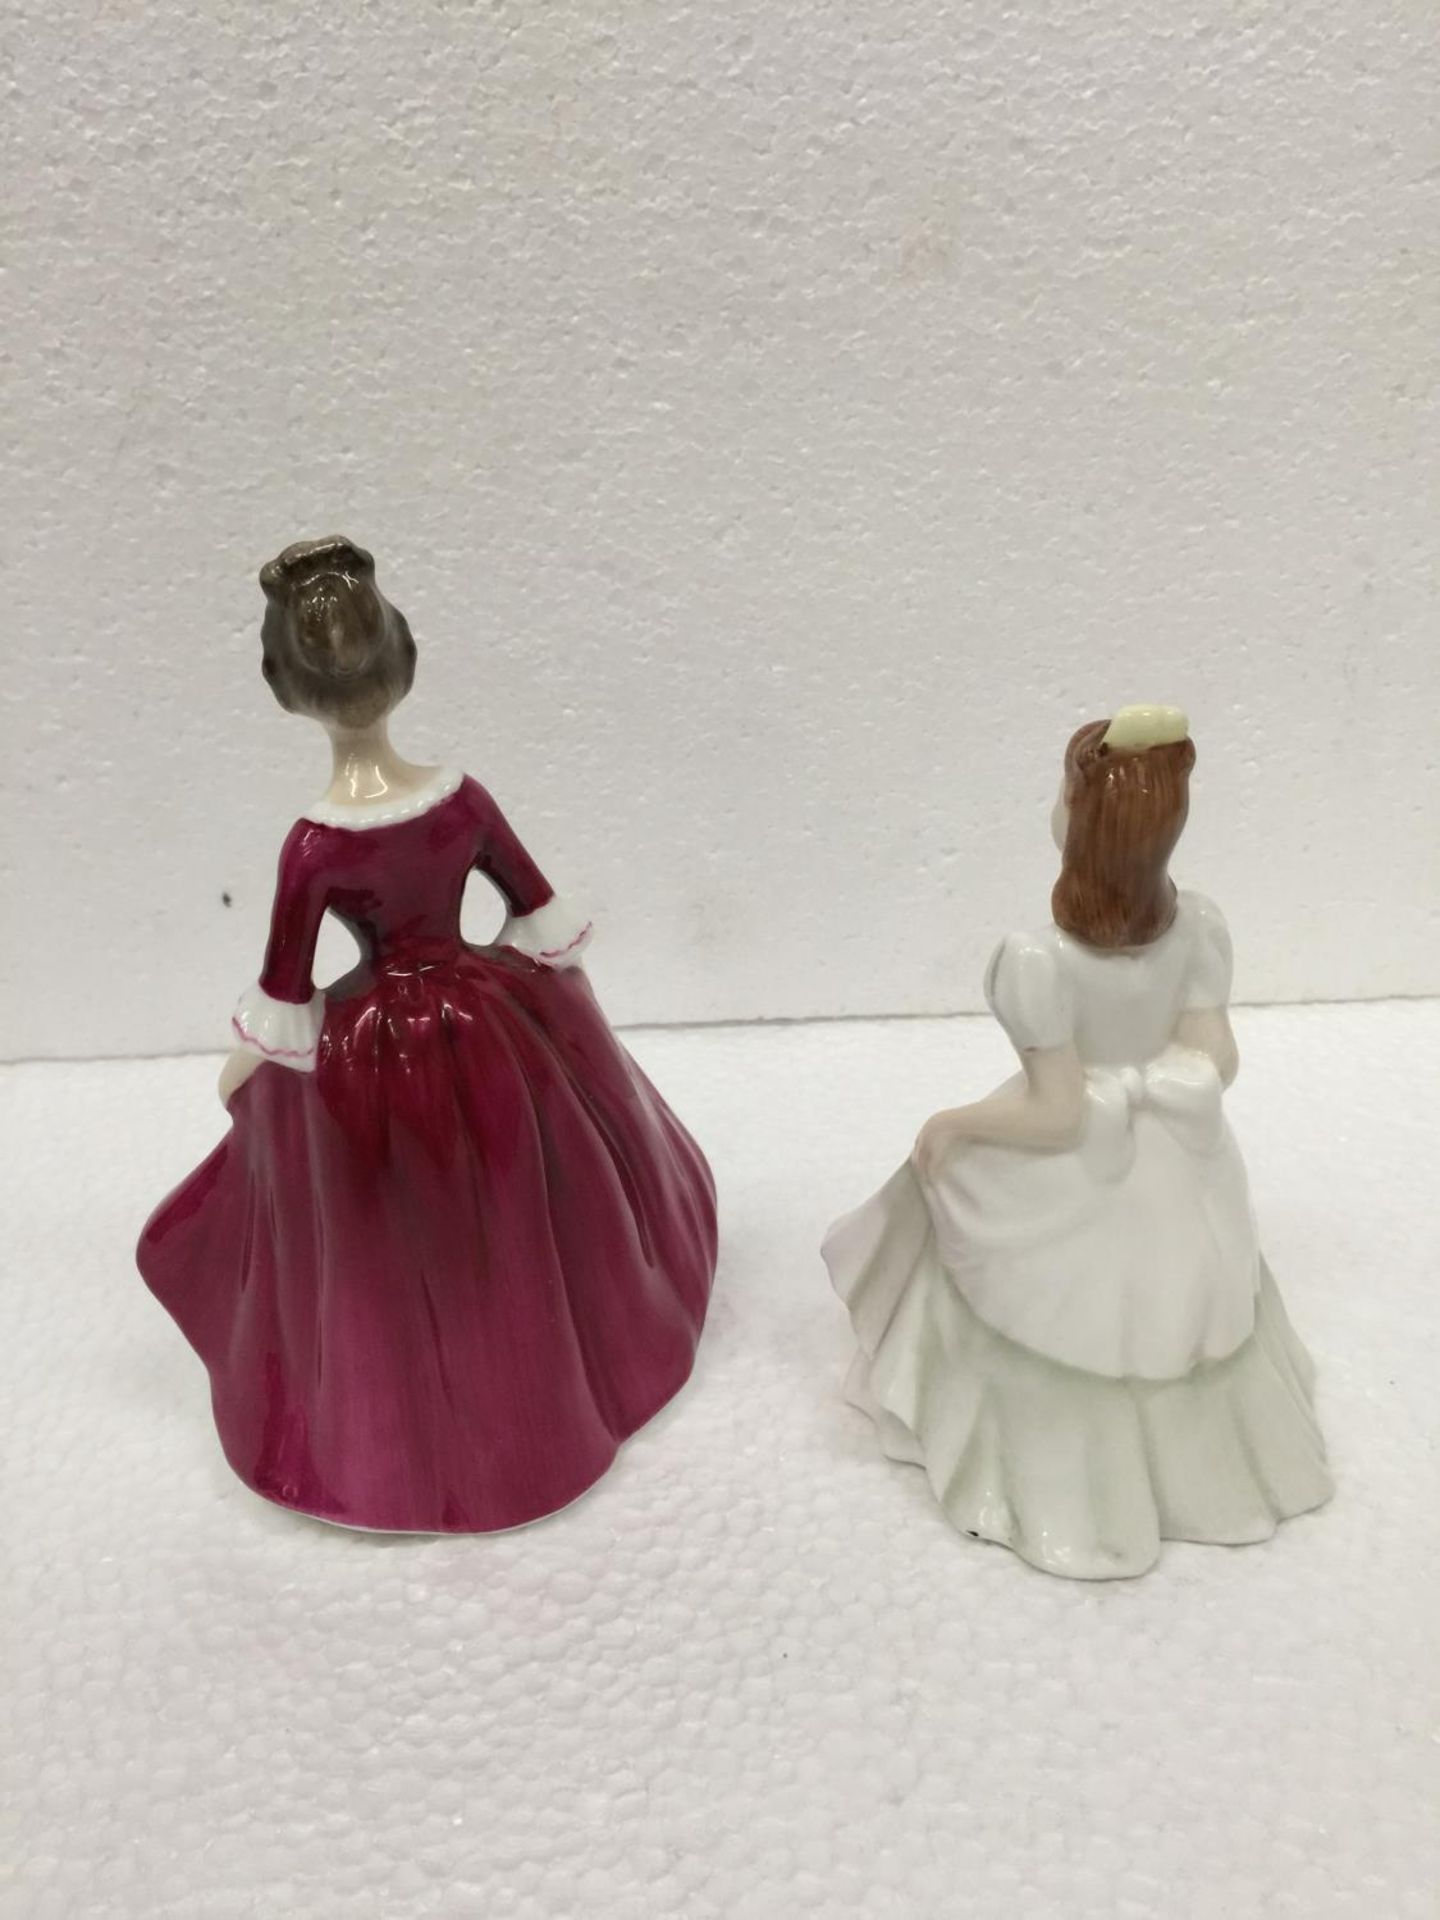 A ROYAL DOULTON SMALL FIGURINE "KERRY" 13 CM TOGETHER WITH A FURTHER FINE BONE CHINA FIGURINE "CARA" - Image 3 of 5